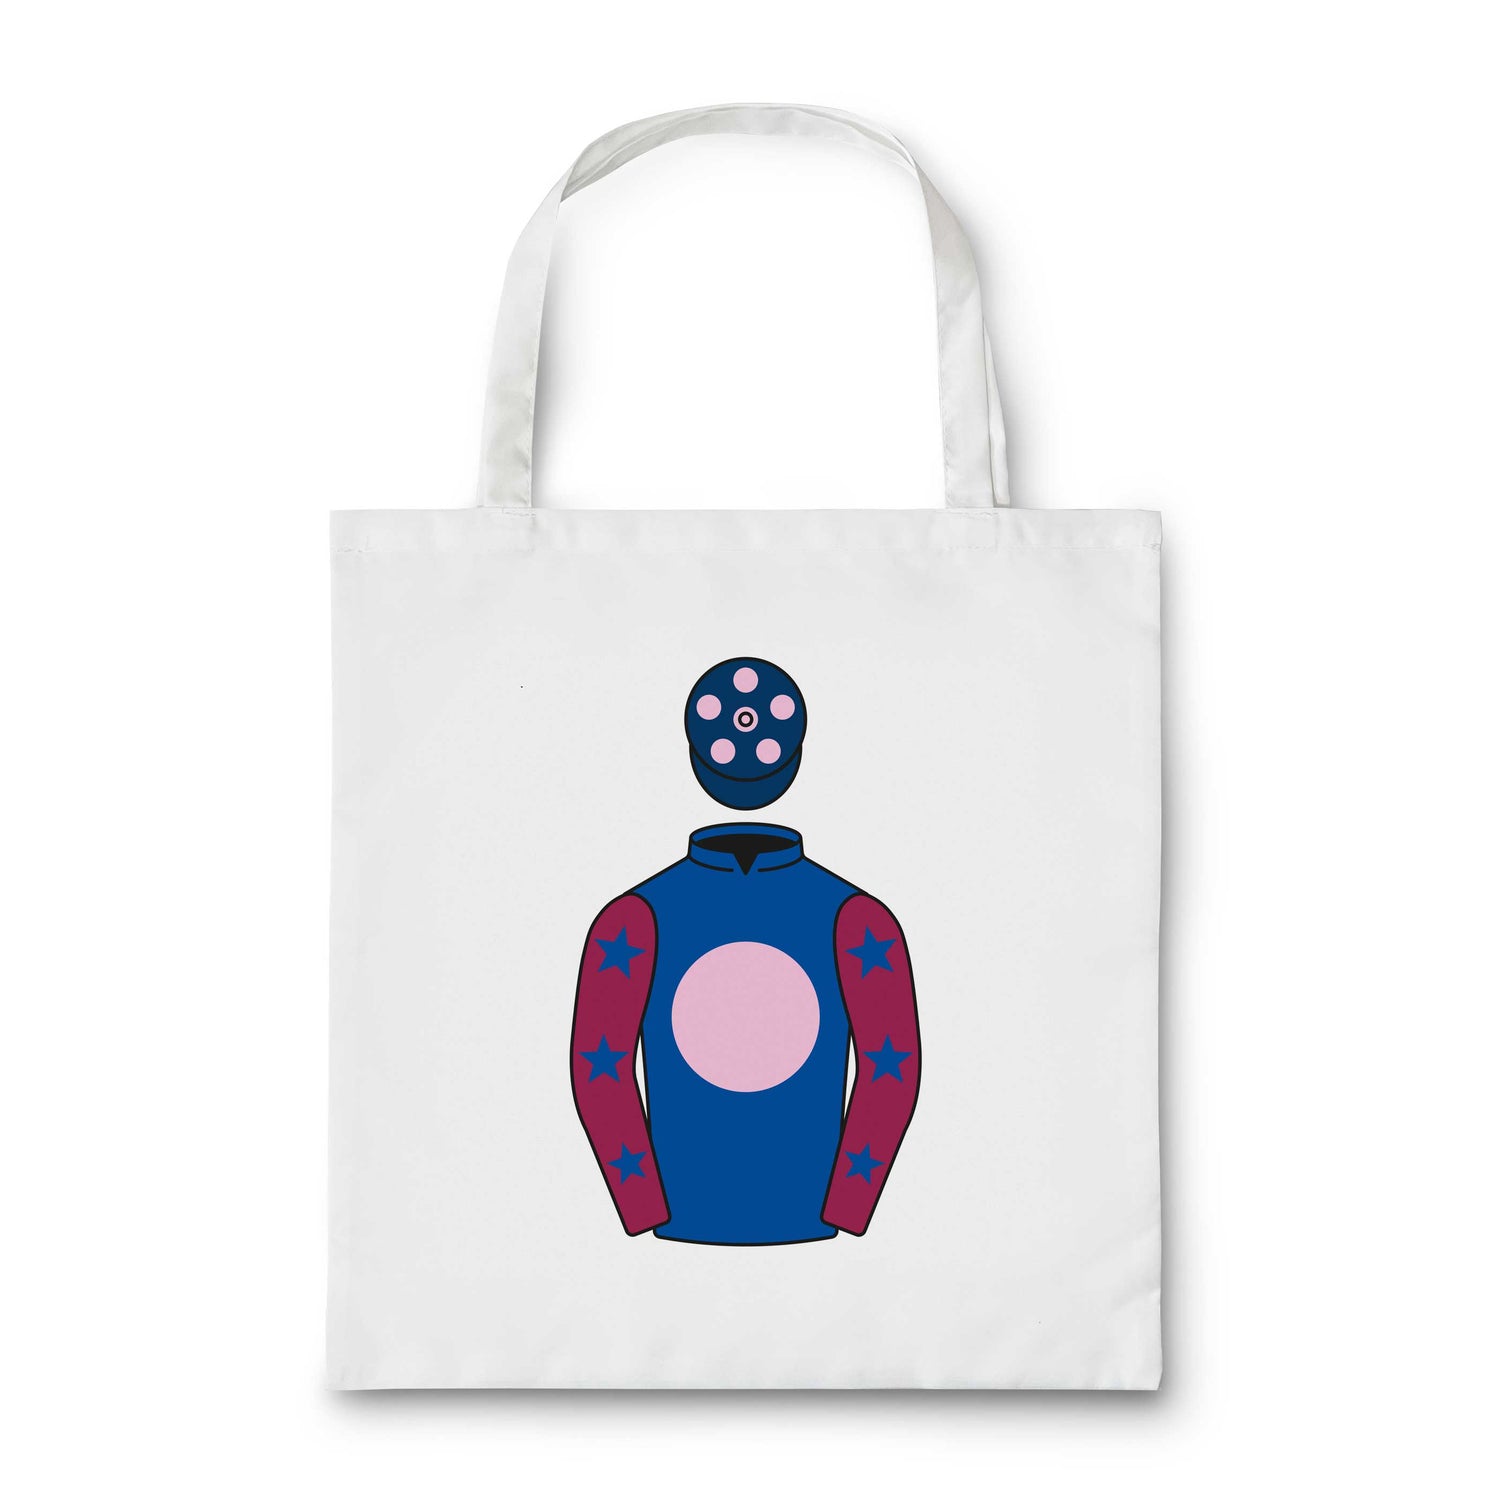 Andrew Gemmell Tote Bag - Tote Bag - Hacked Up